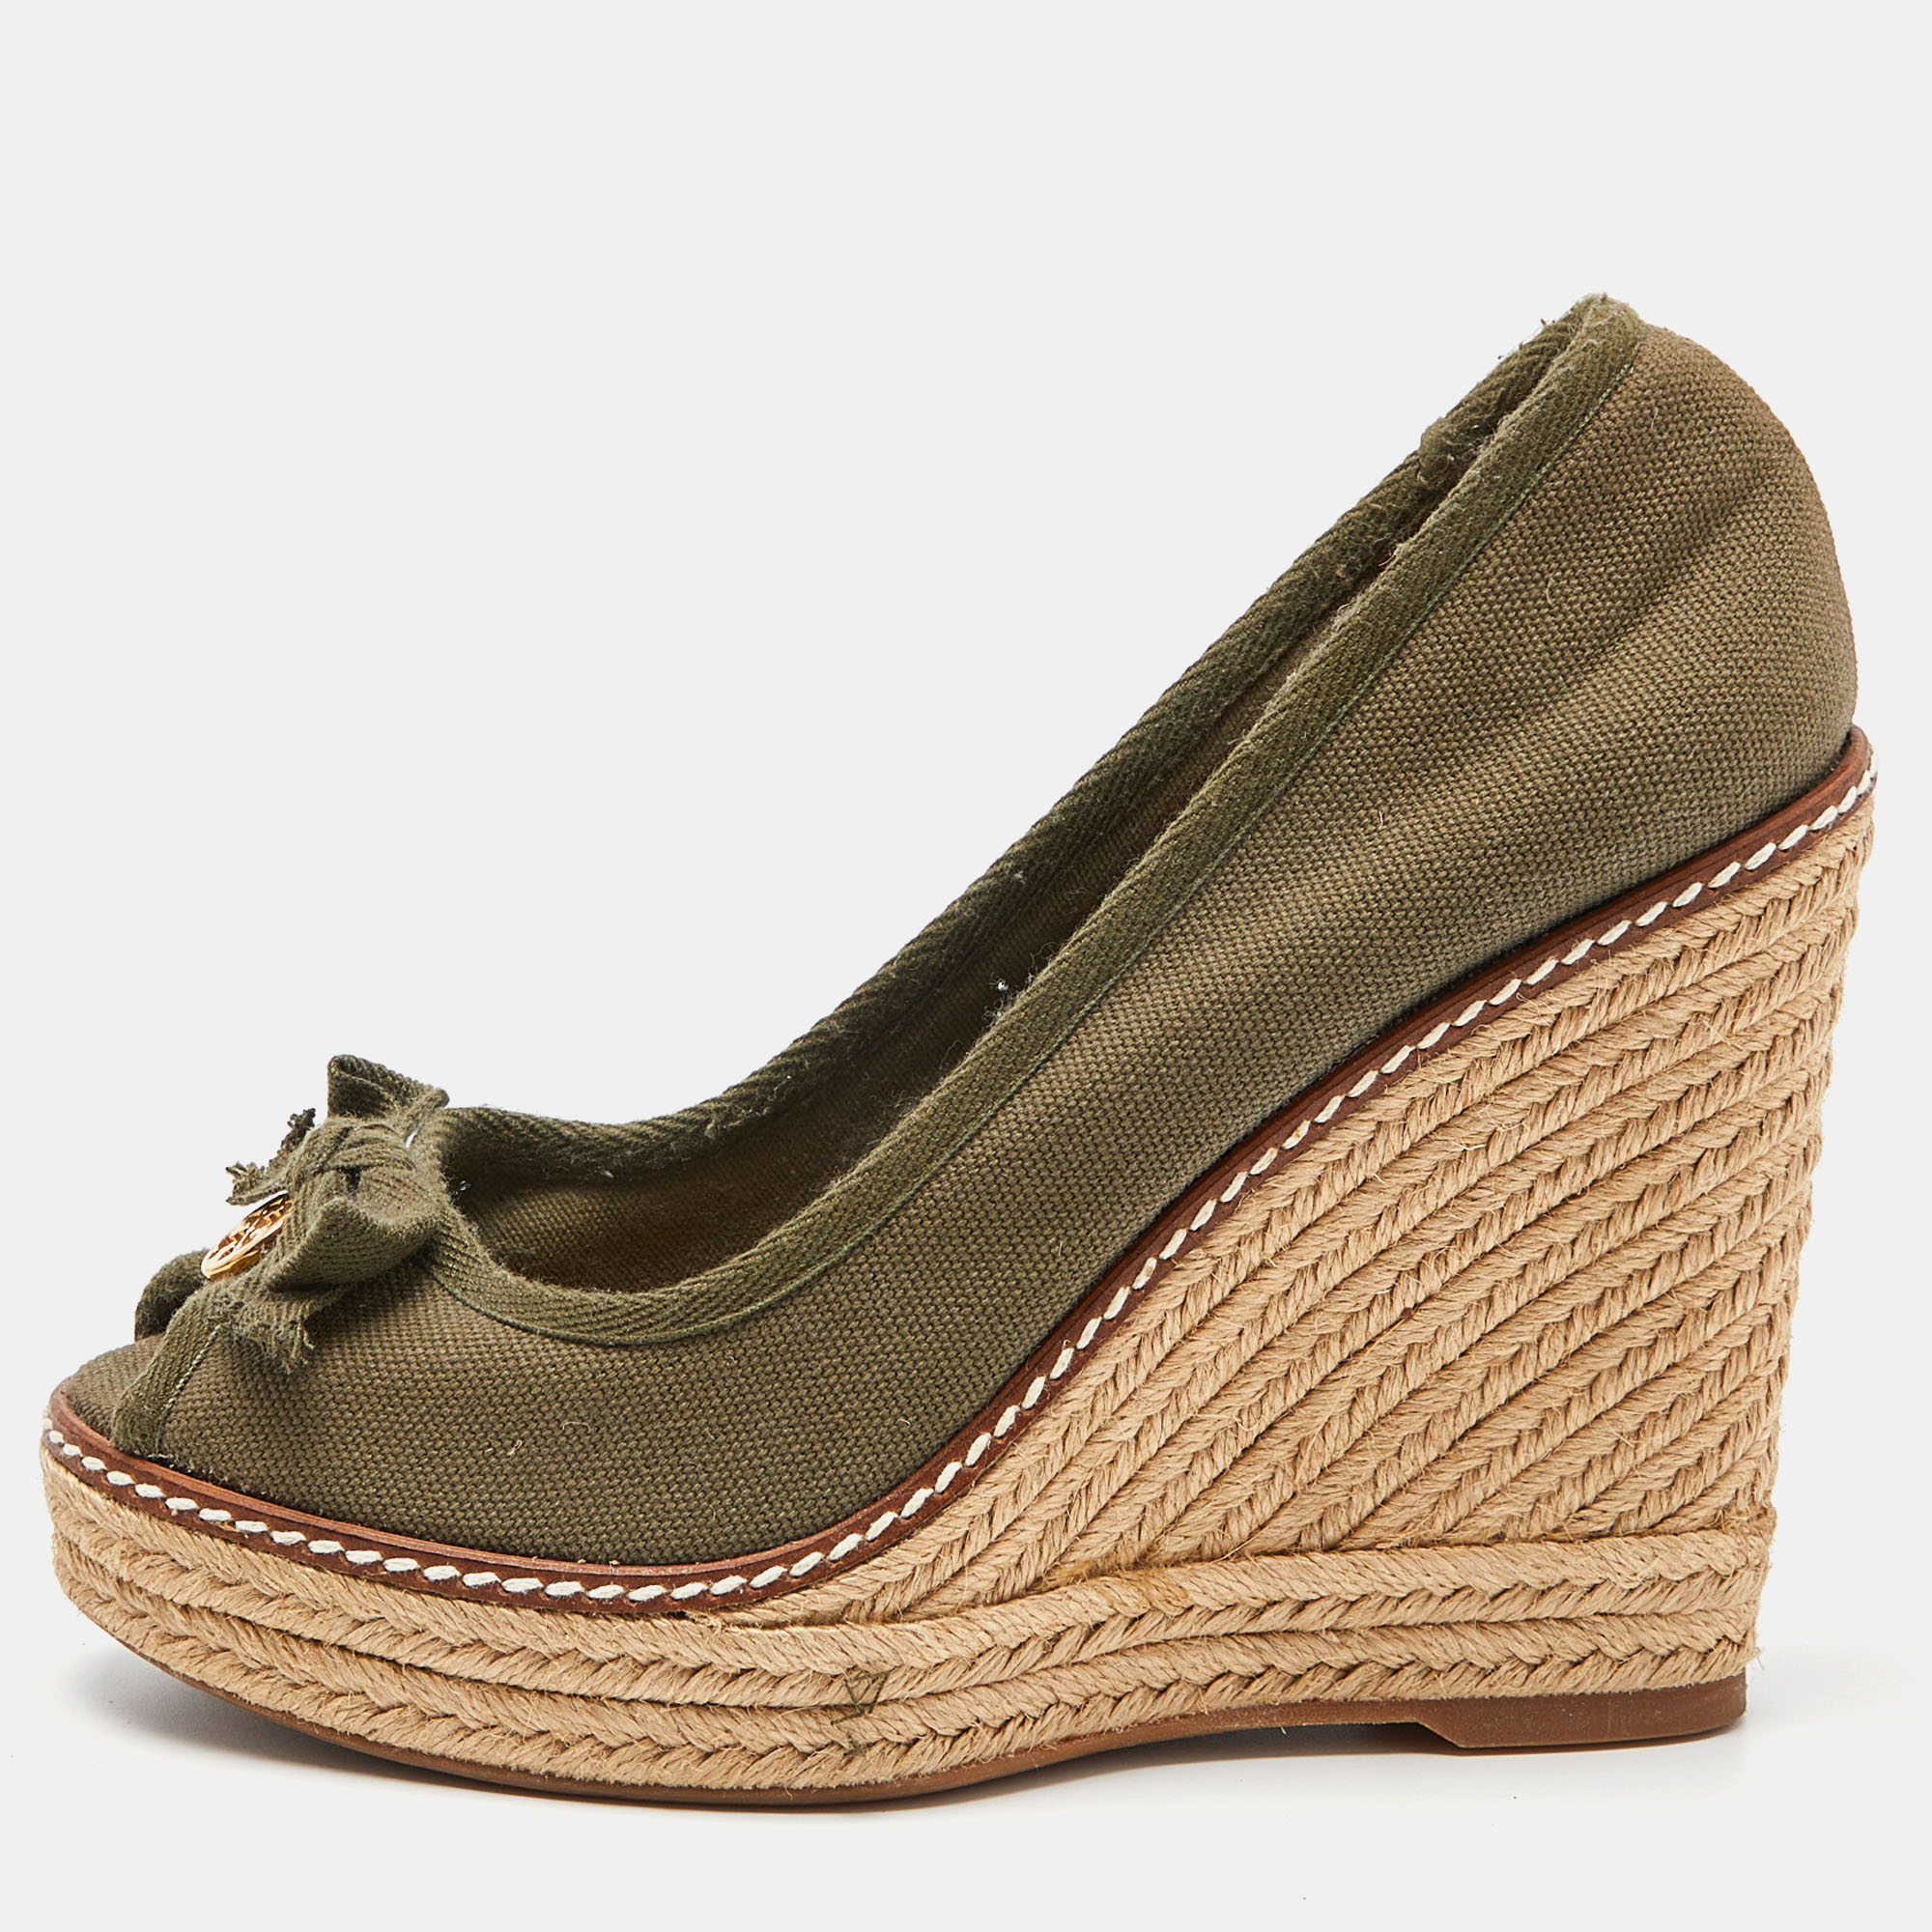 Tory Burch Green Canvas Jackie Espadrille Wedge Pumps Size 36